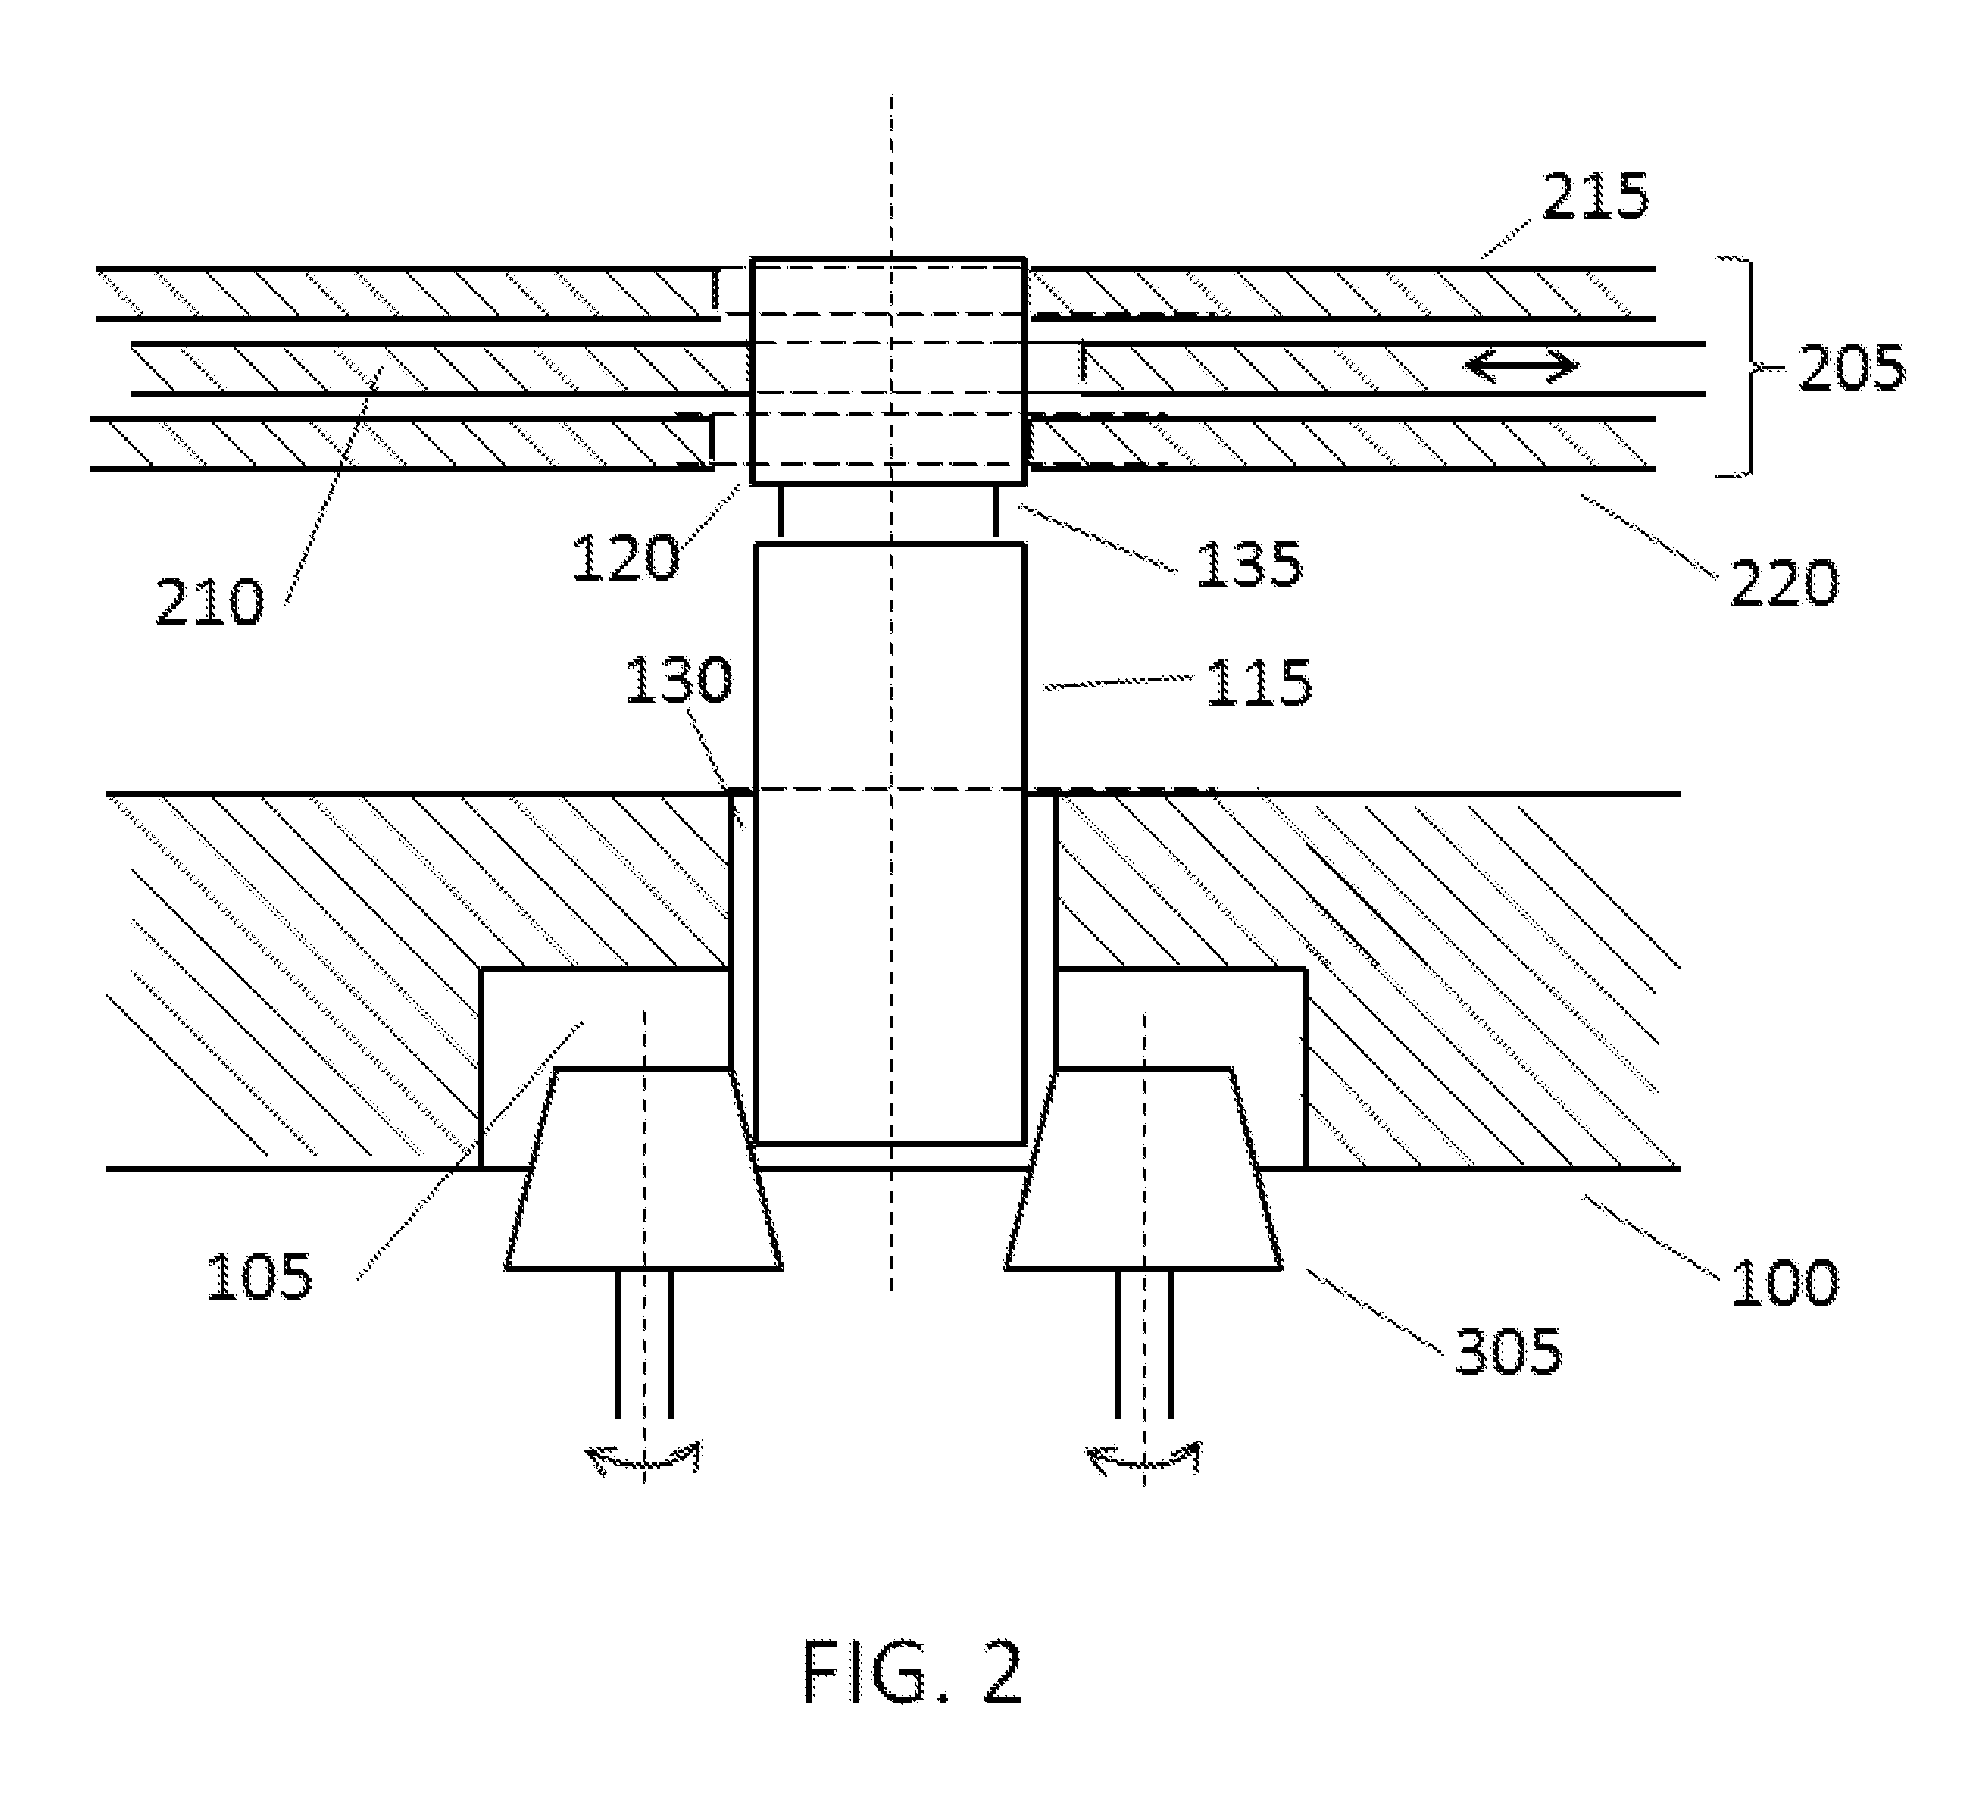 Apparatus and methods for handling tubes or vials